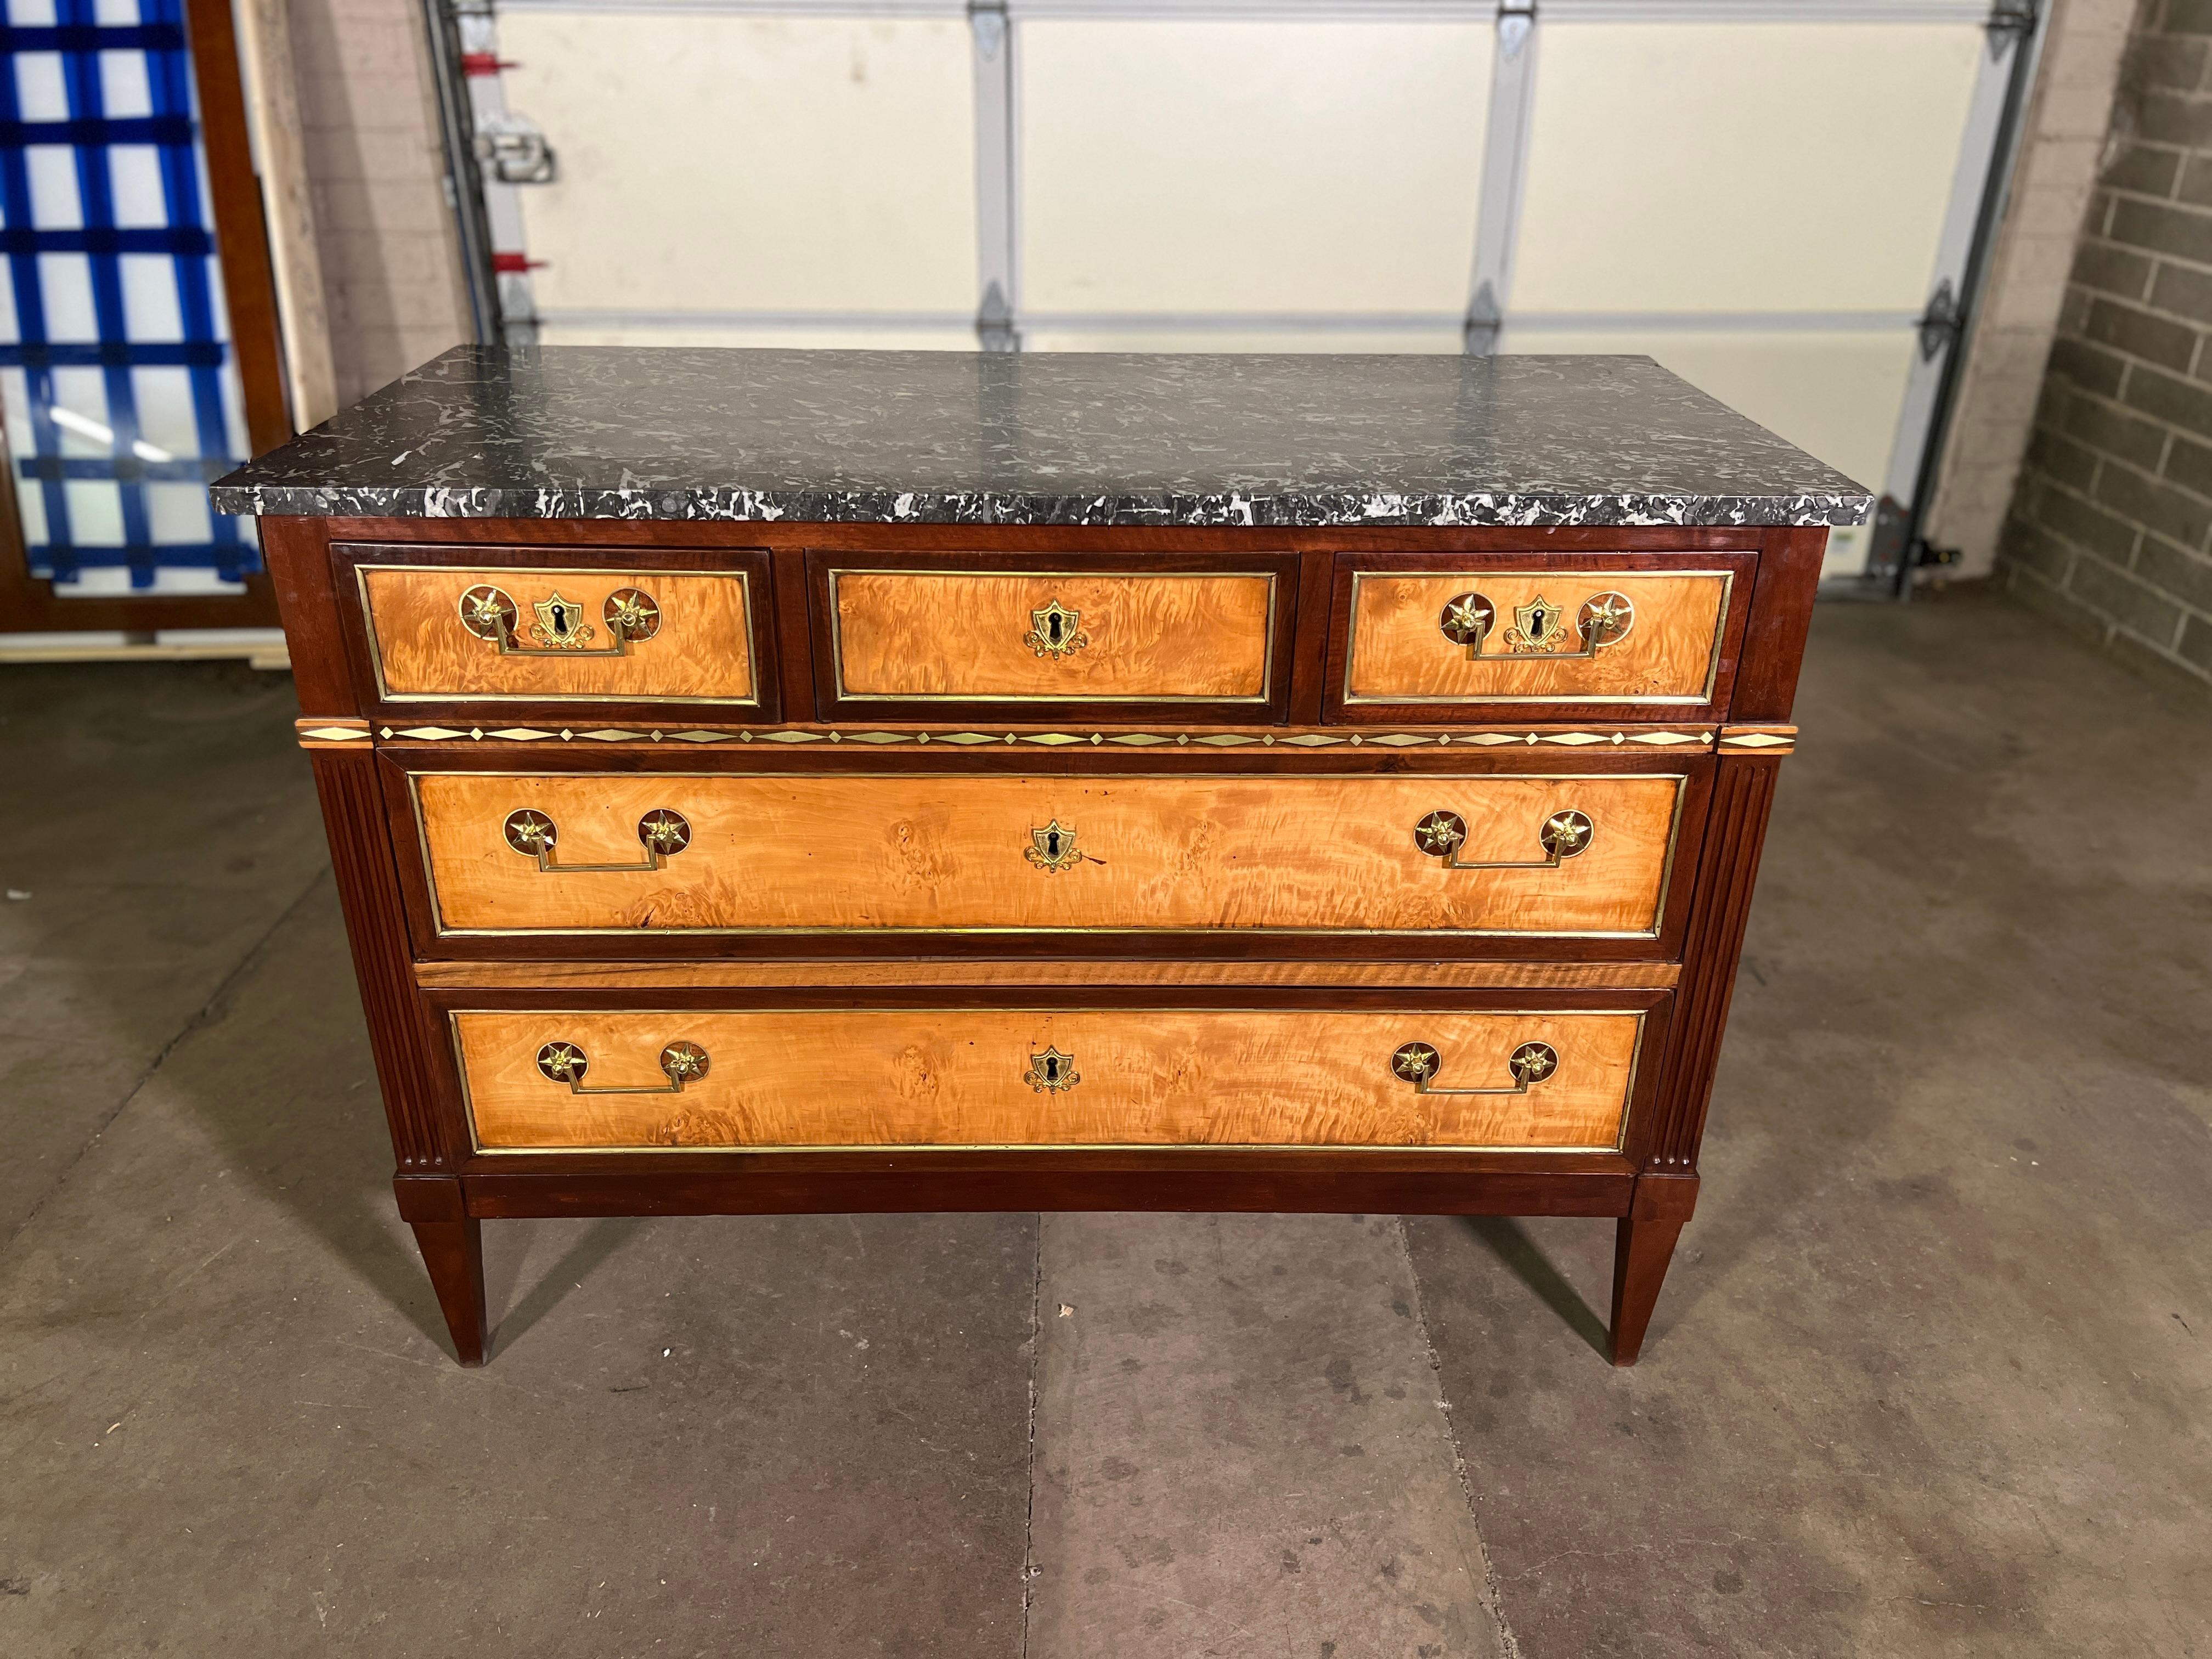 18th Century Directoire Commode, Mahogany, Walnut and Sycamore  with Original hardware.  has CHAPNIS stamped.  Piece is gorgeous and priced to sell.